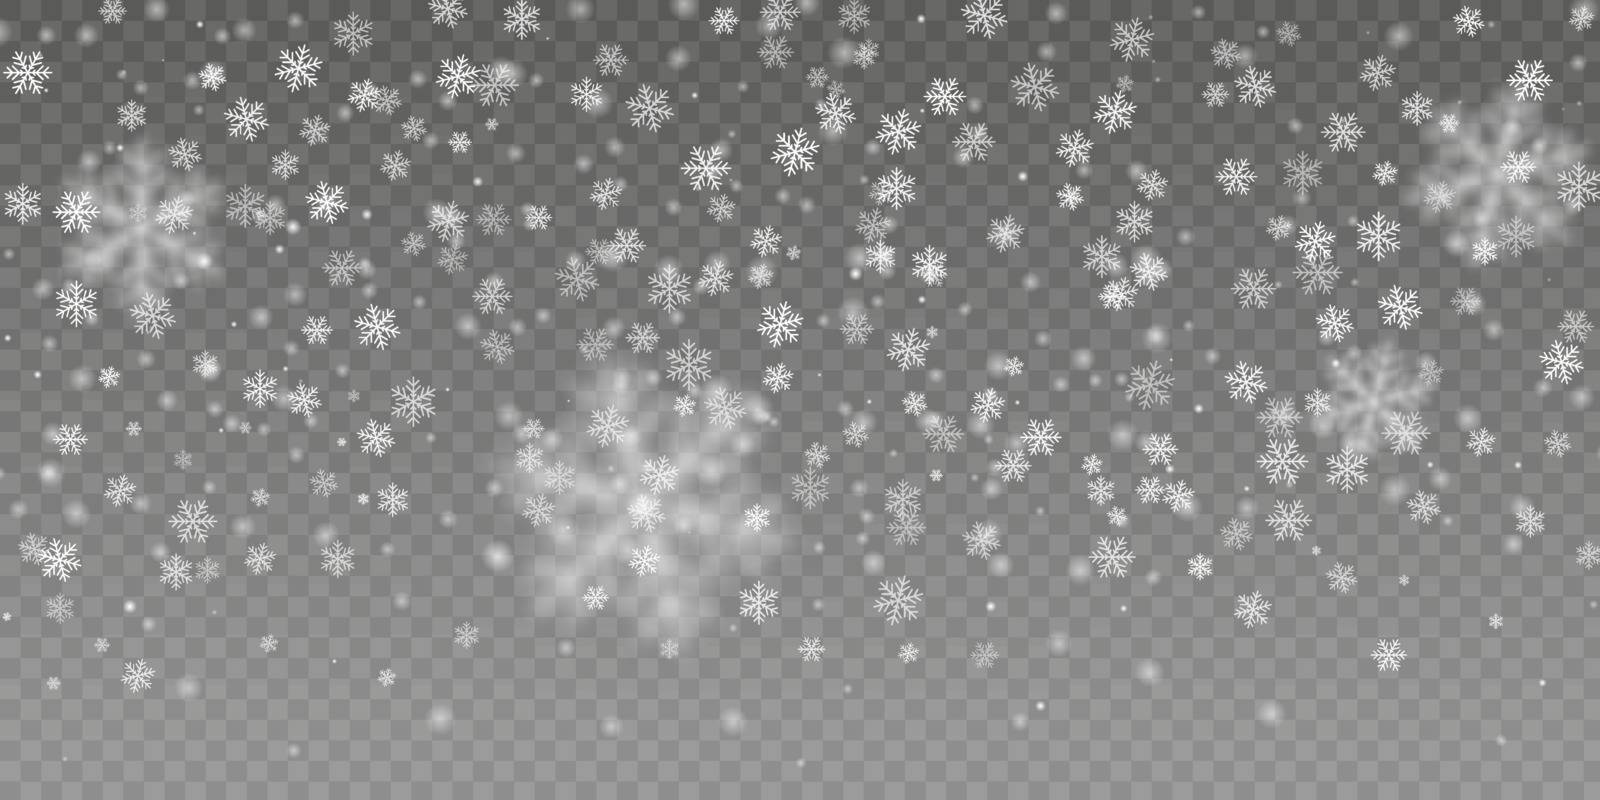 Falling snowflake. Christmas snow realistic decoration effect. Christmas winter white snow flake pattern isolated on dark background. Magic snowfall texture.